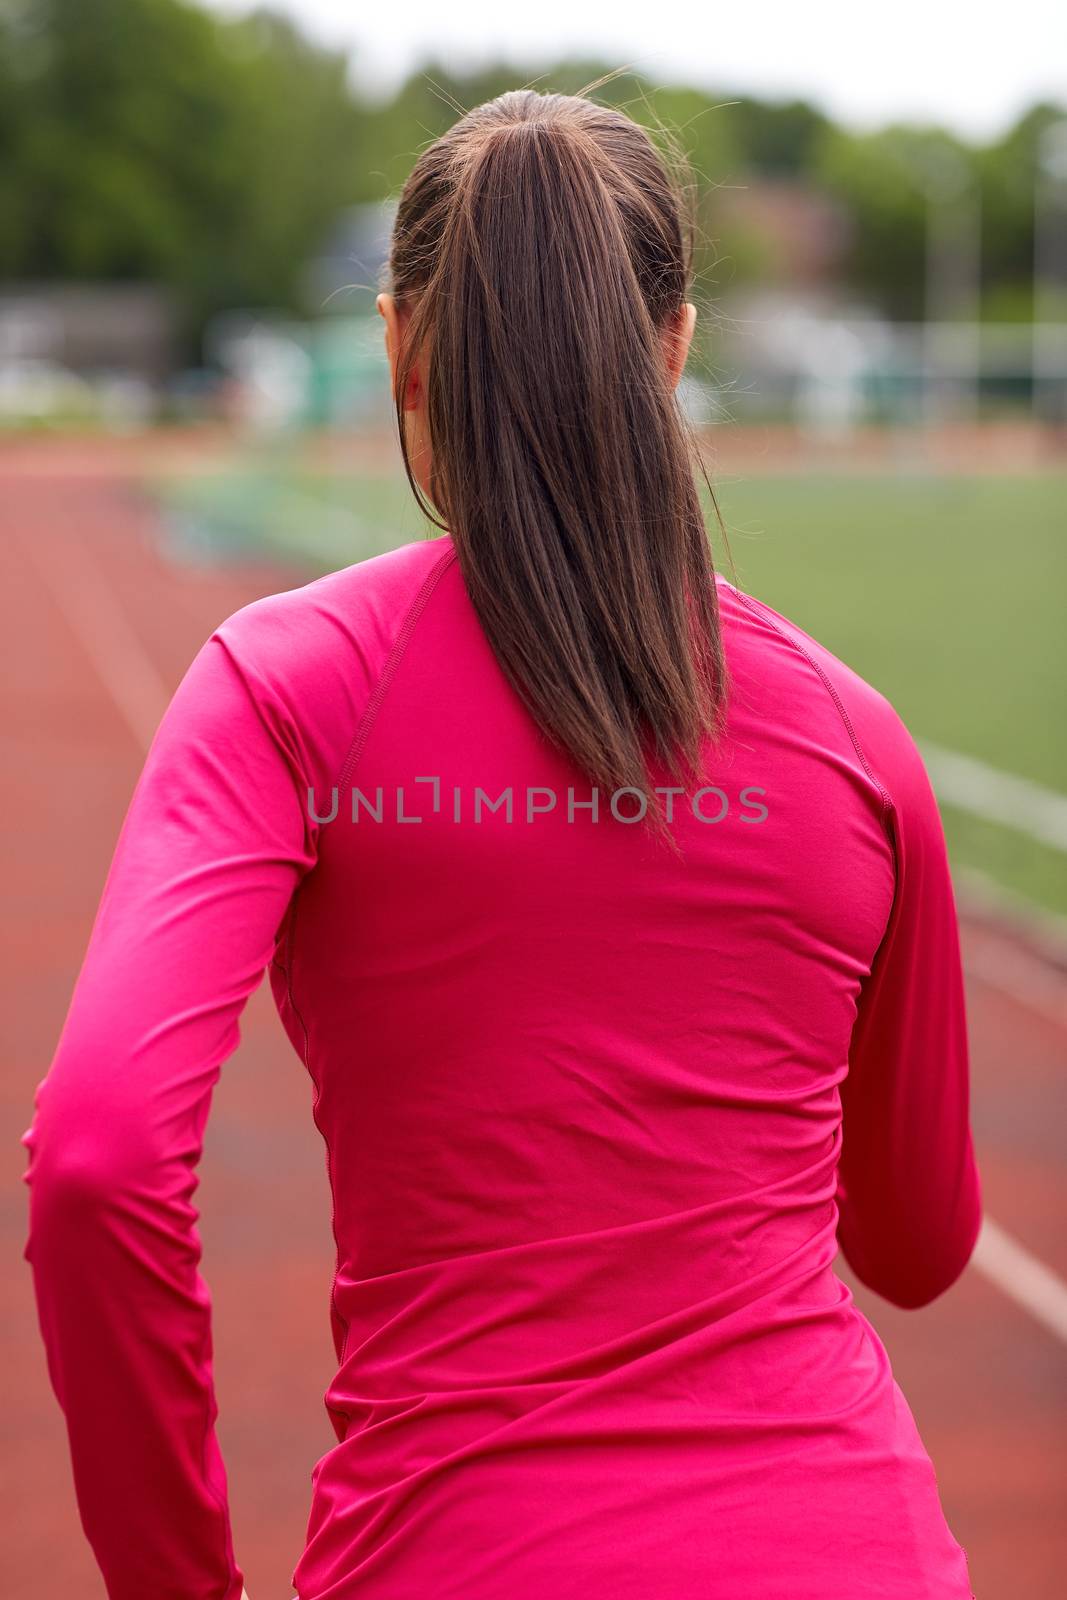 woman running on track outdoors from back by dolgachov